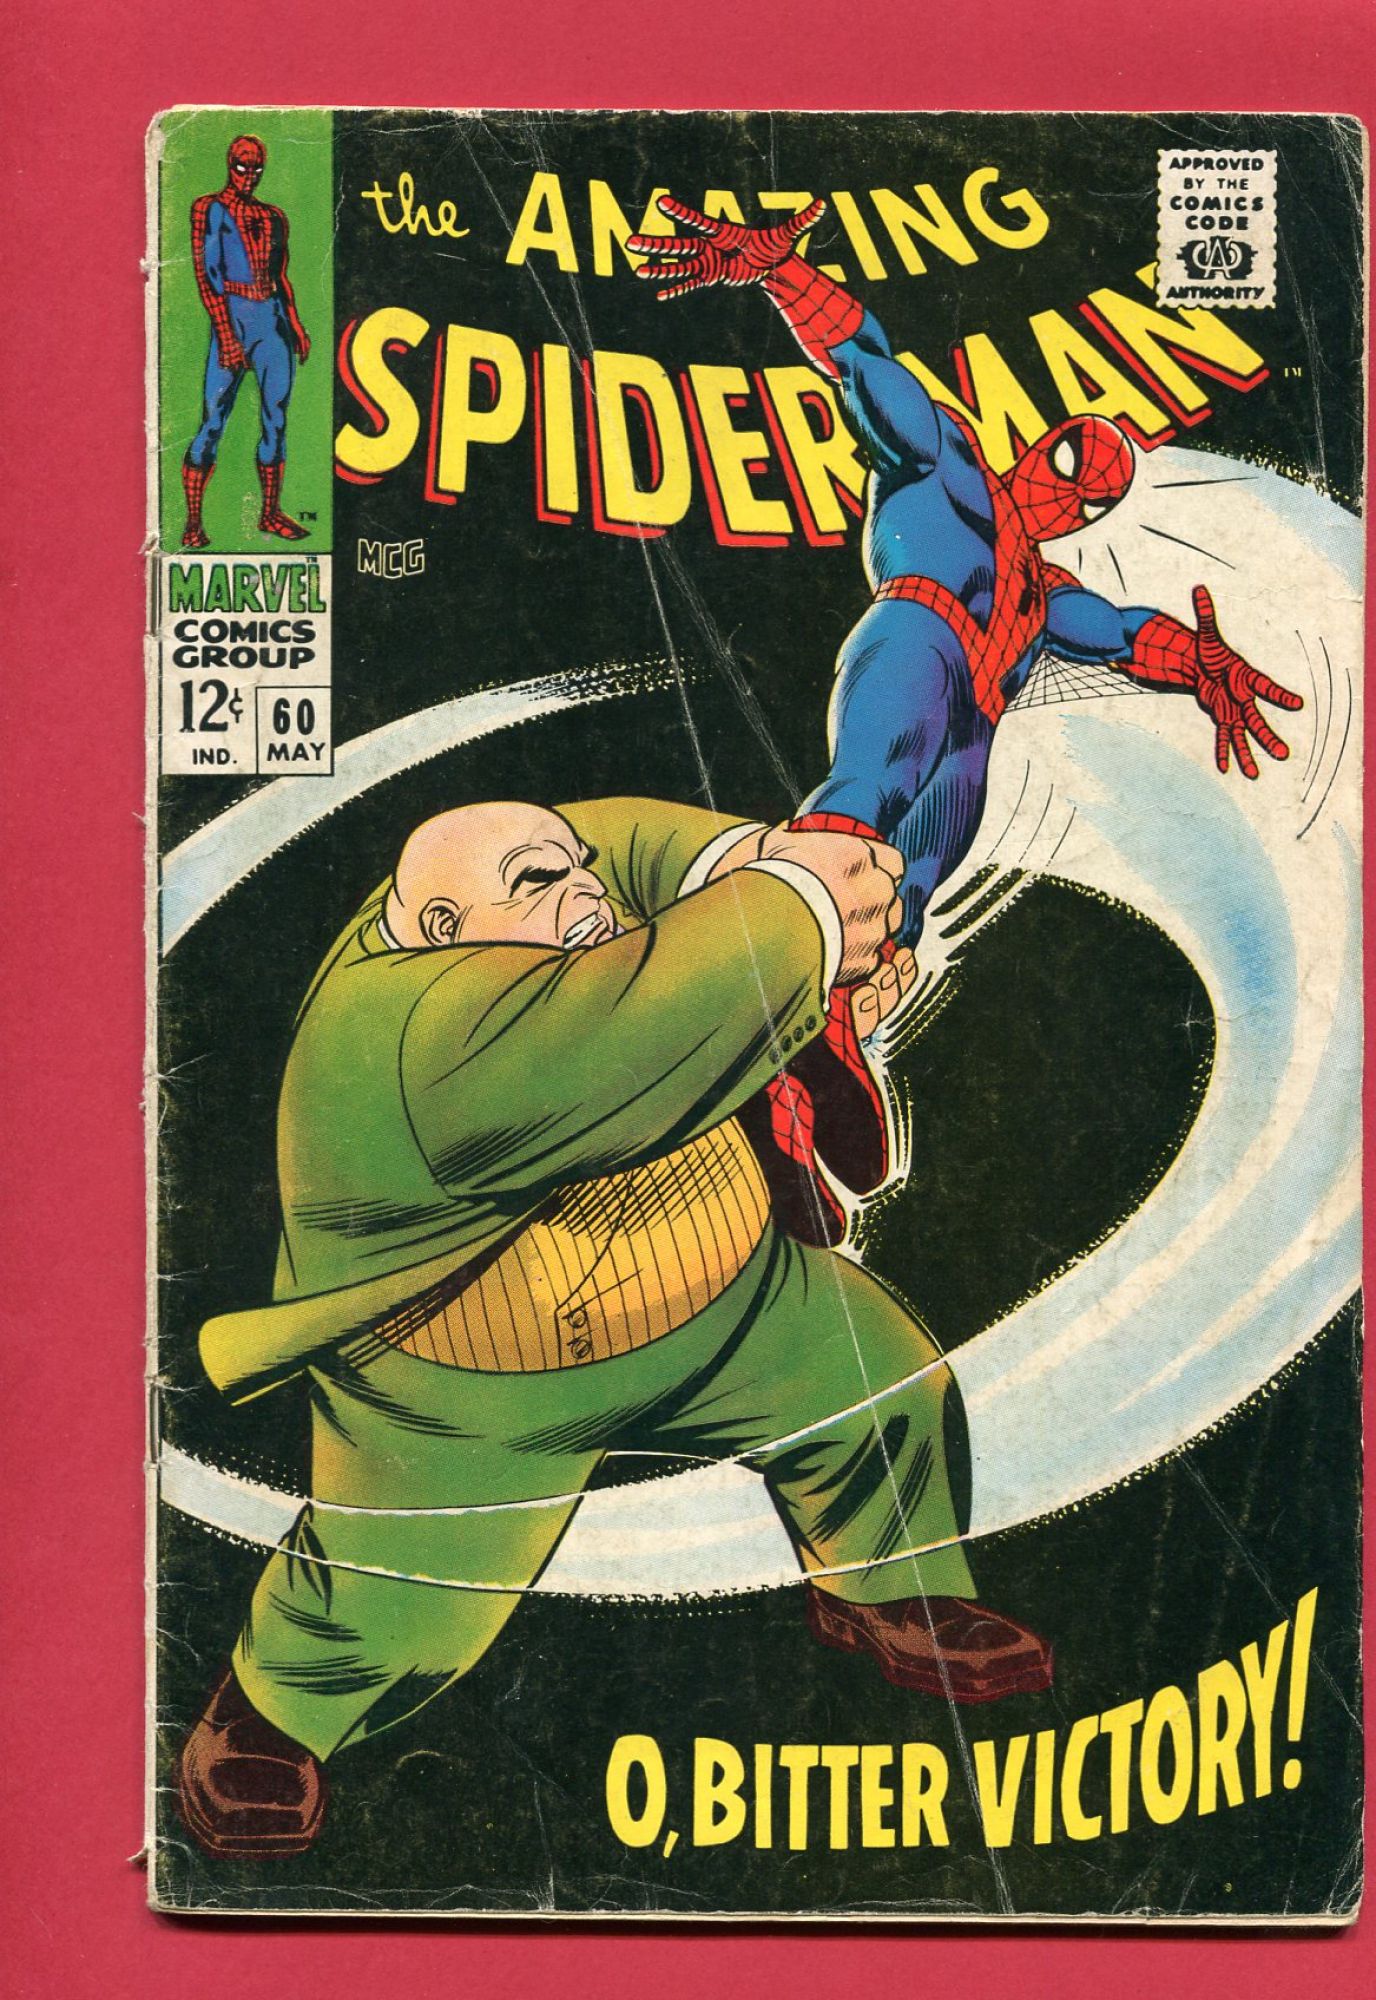 Amazing Spider-Man #60, May 1968, 2.5 GD+